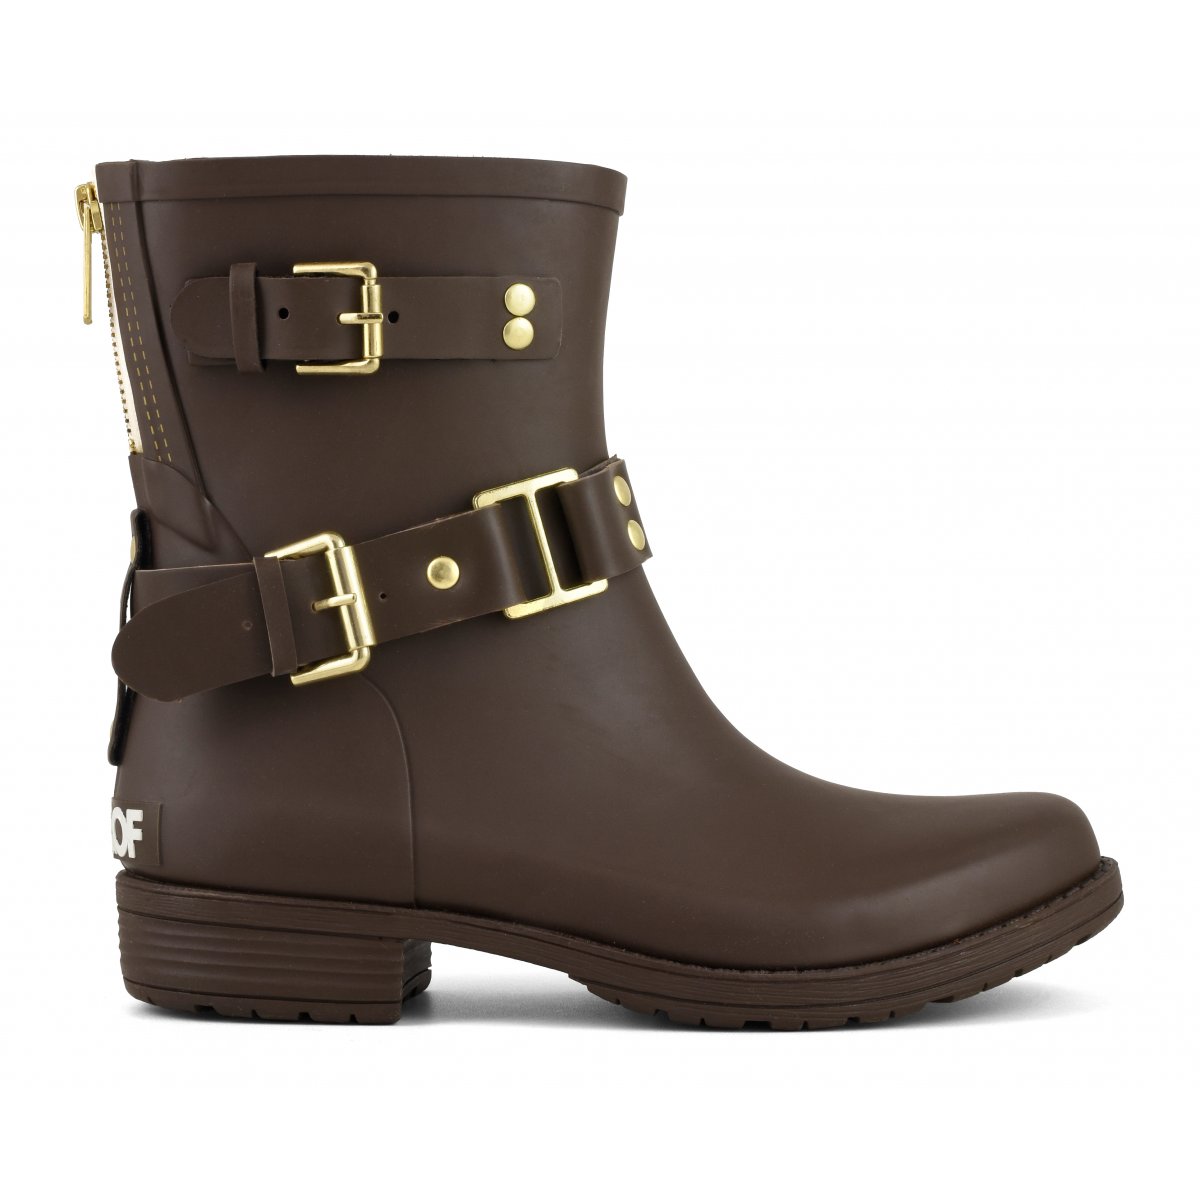 Ankle rain boot with colored zip